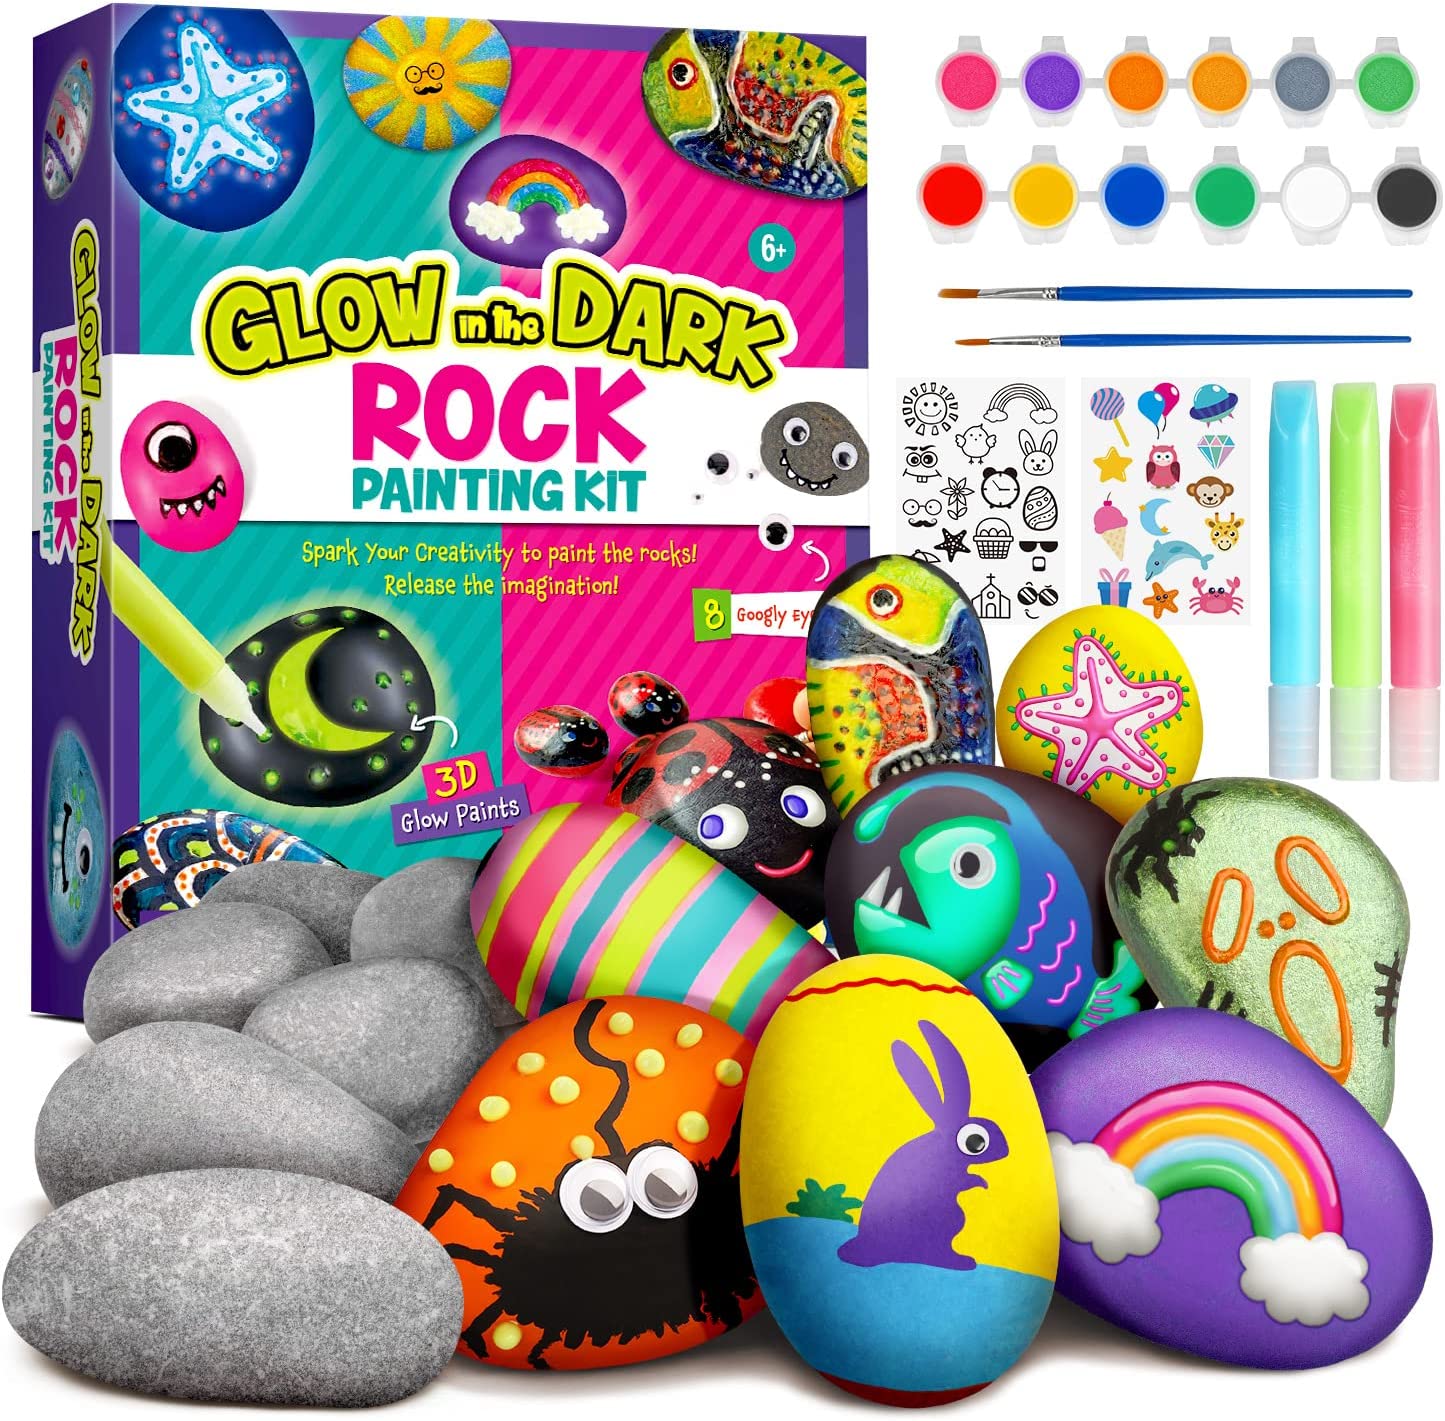 Glow-in-the-Dark Rock Painting Kit: Unleash Your Child's